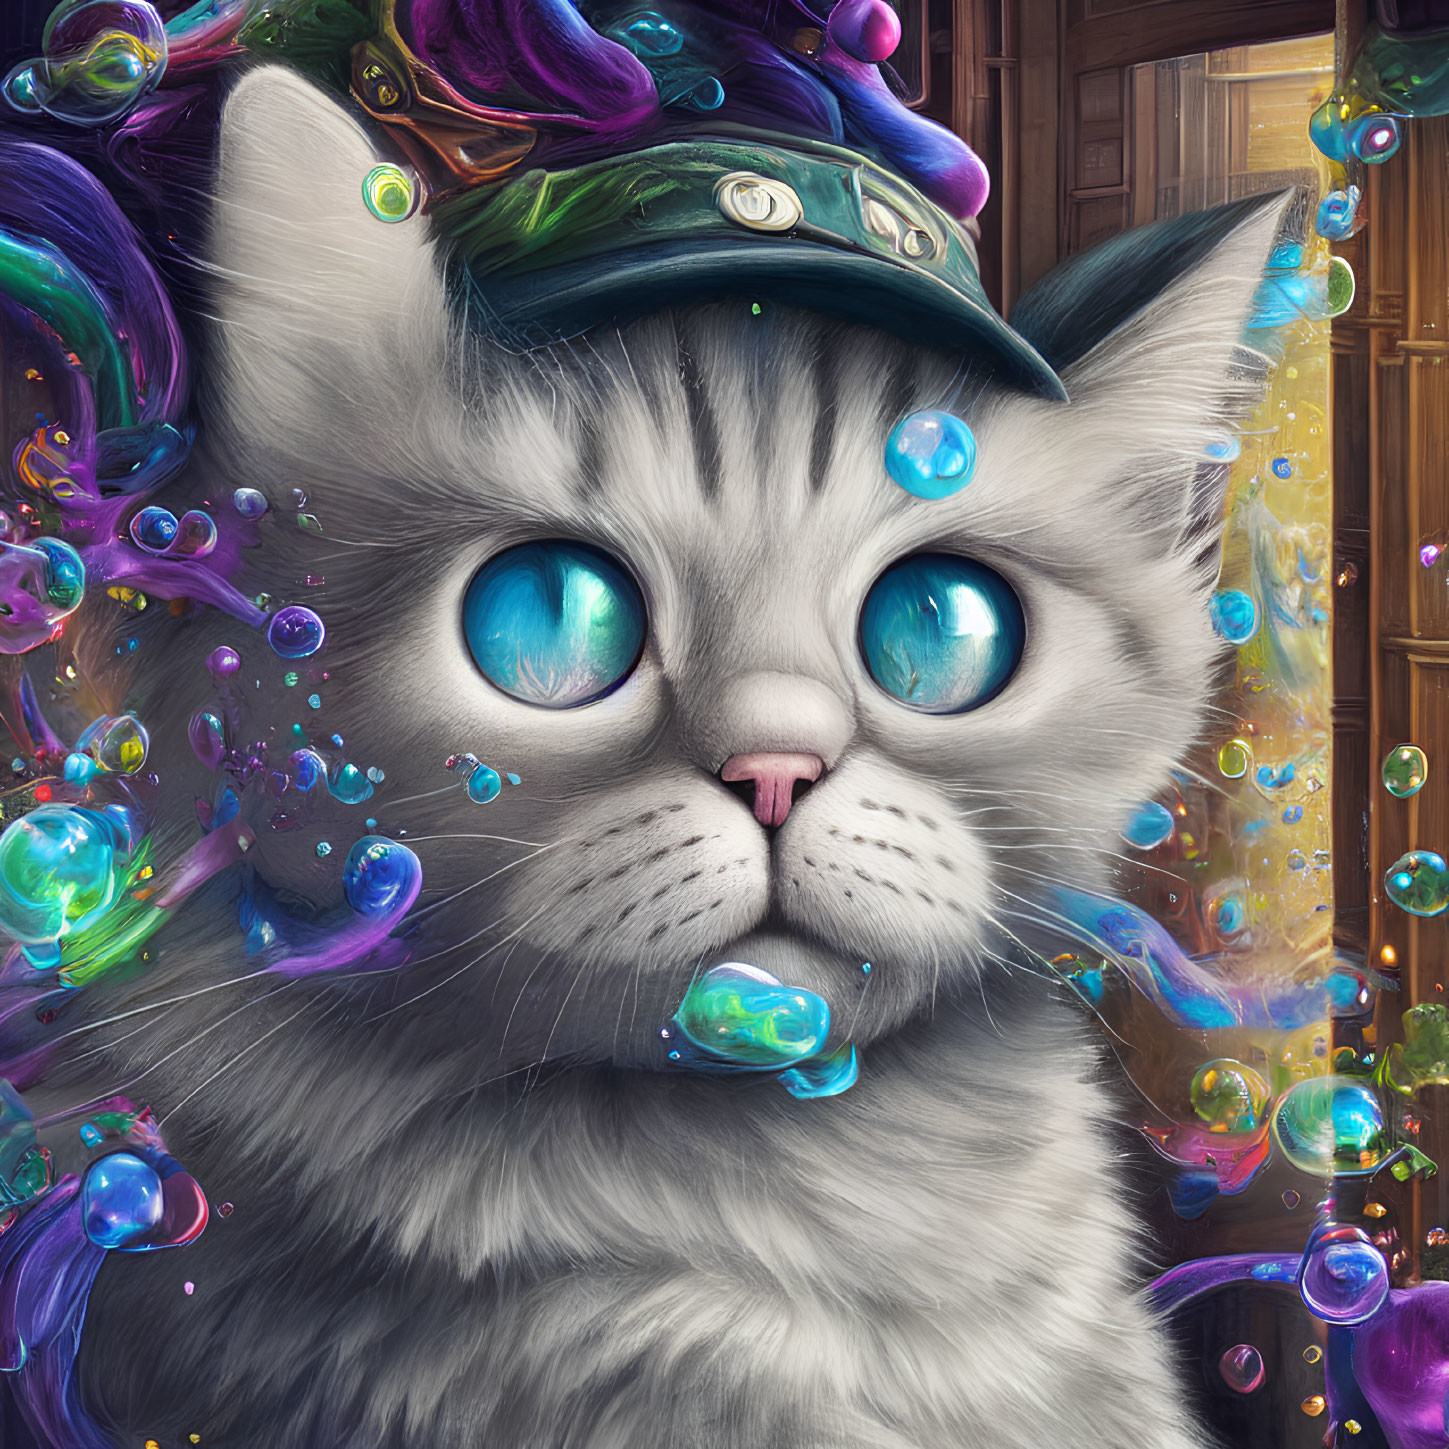 Gray Cat with Blue Eyes Wearing Wizard Hat in Colorful Scene